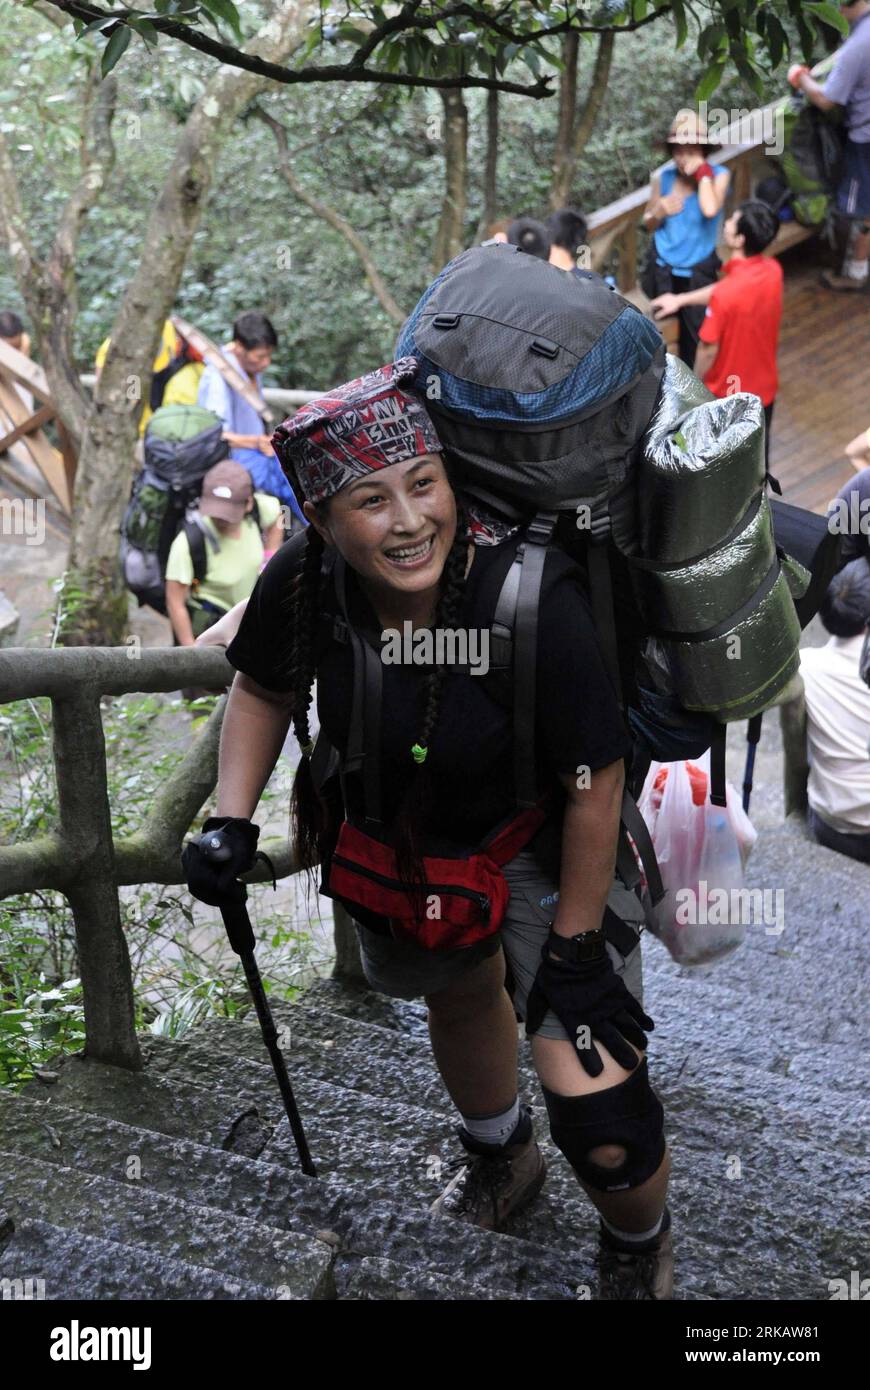 Bildnummer: 54431984  Datum: 11.09.2010  Copyright: imago/Xinhua PINGXIANG, Sept. 12, 2010 (Xinhua) -- A backpacker hikes in the Wugong Mountain in Pingxiang, east China s Jiangxi Province, Sept. 11, 2010. About 3,600 backpackers gathered in the Wugong Mountain to show their capacities of surviving in the wild during a three-day-long tent festival which kicked off on Friday. (Xinhua/Yu Heping) (zn) CHINA-JIANGXI-PINGXIANG-TENT FESTIVAL (CN) PUBLICATIONxNOTxINxCHN Gesellschaft kbdig xkg 2010 hoch o0 zelten Survival Training überleben Wildnis Backpacker    Bildnummer 54431984 Date 11 09 2010 Cop Stock Photo